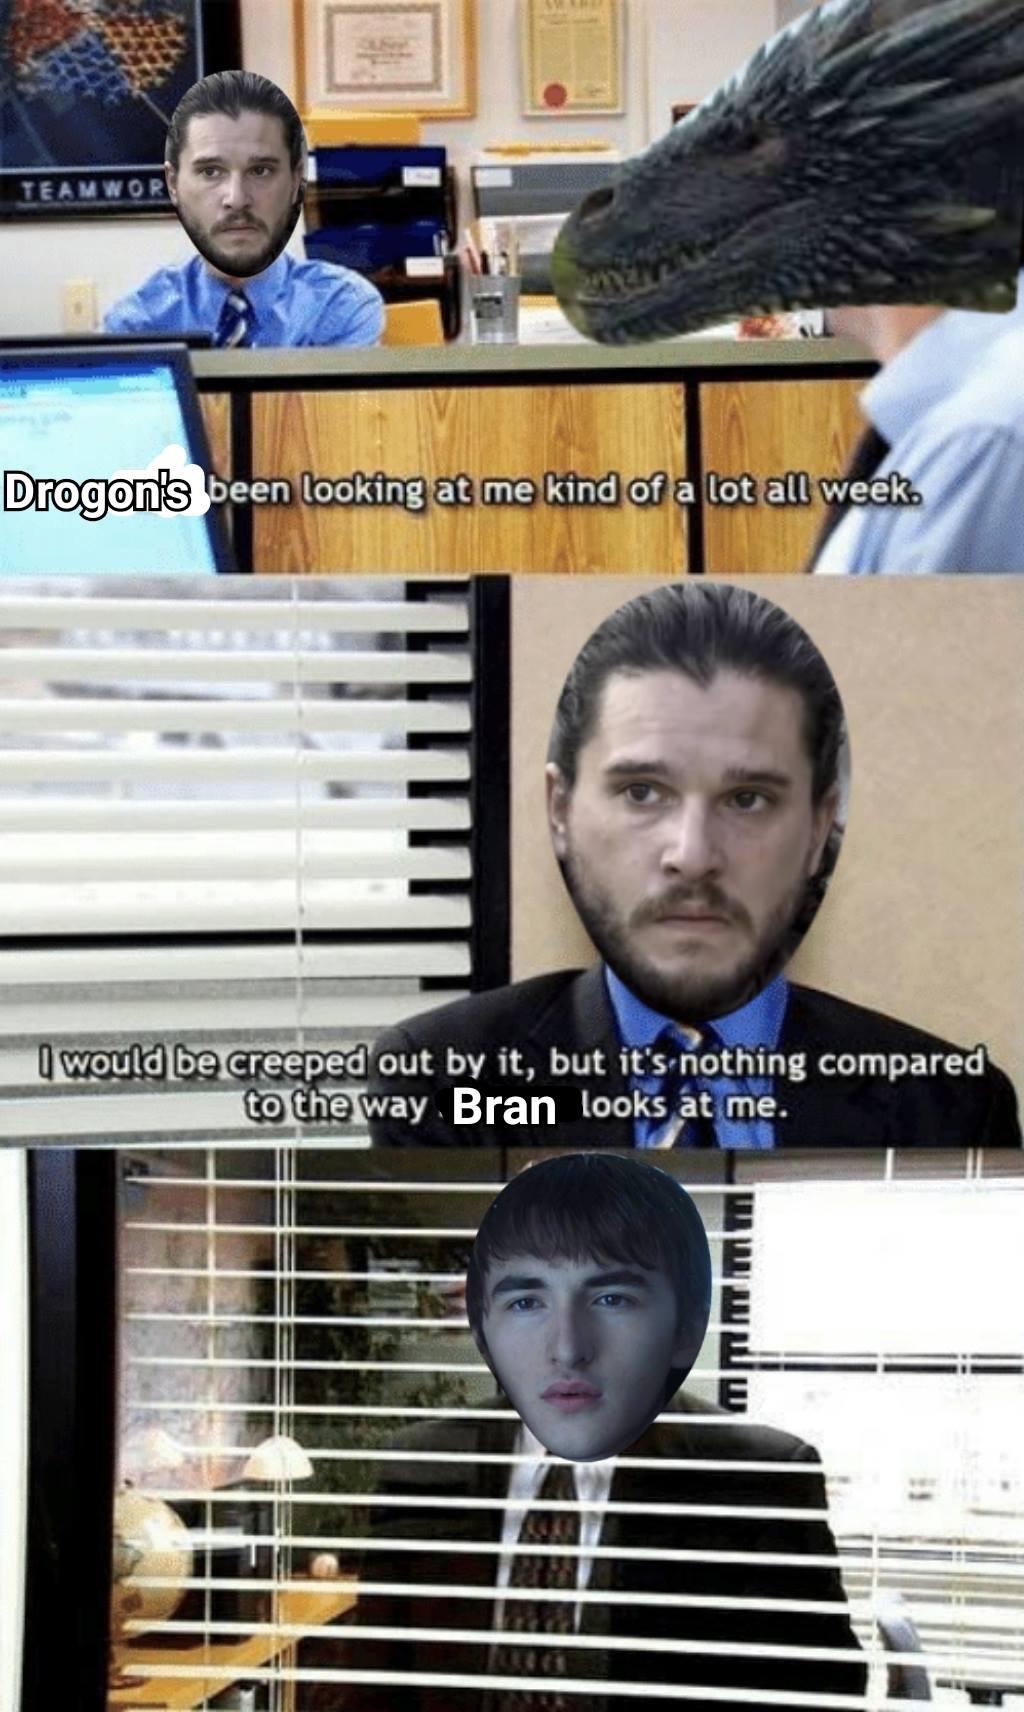 the office - office ryan quotes - Teamwor Drogon's been looking at me kind of a lot all week. I would be creeped out by it, but it's nothing compared to the way Bran looks at me. mmmmm